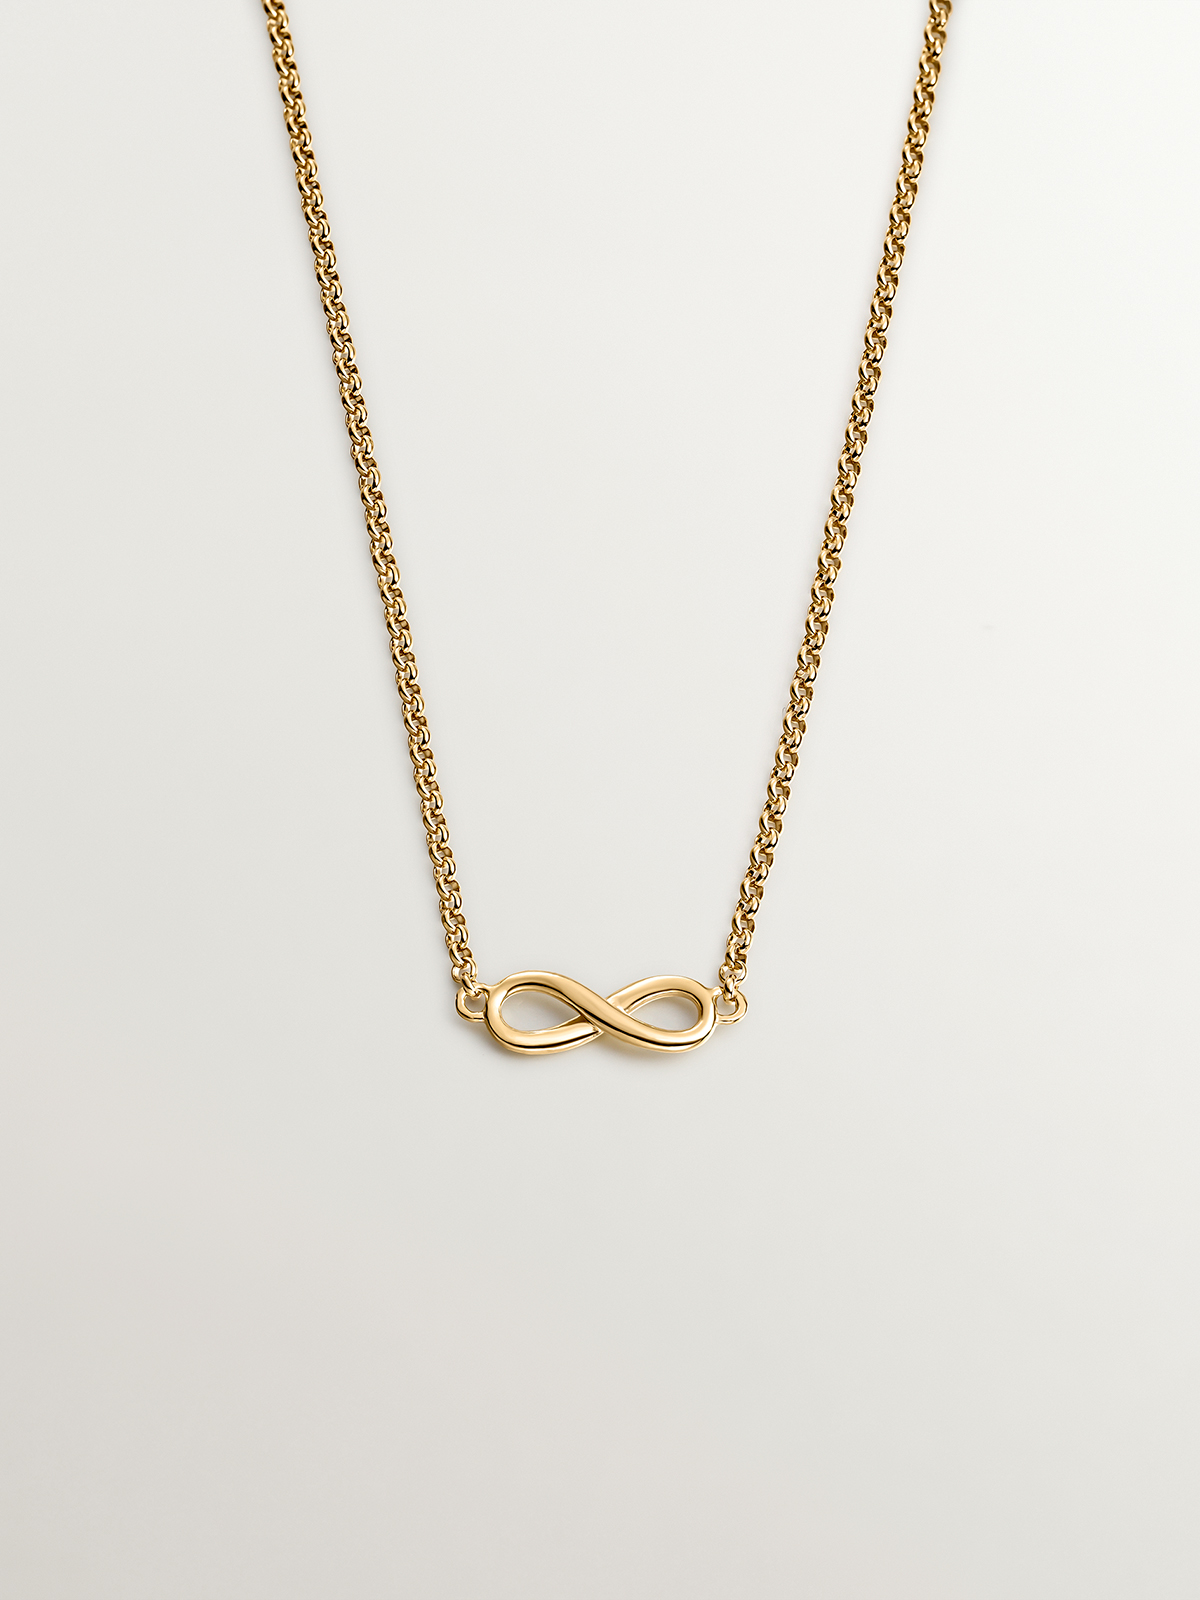 925 Silver pendant dipped in 18K yellow gold with infinity